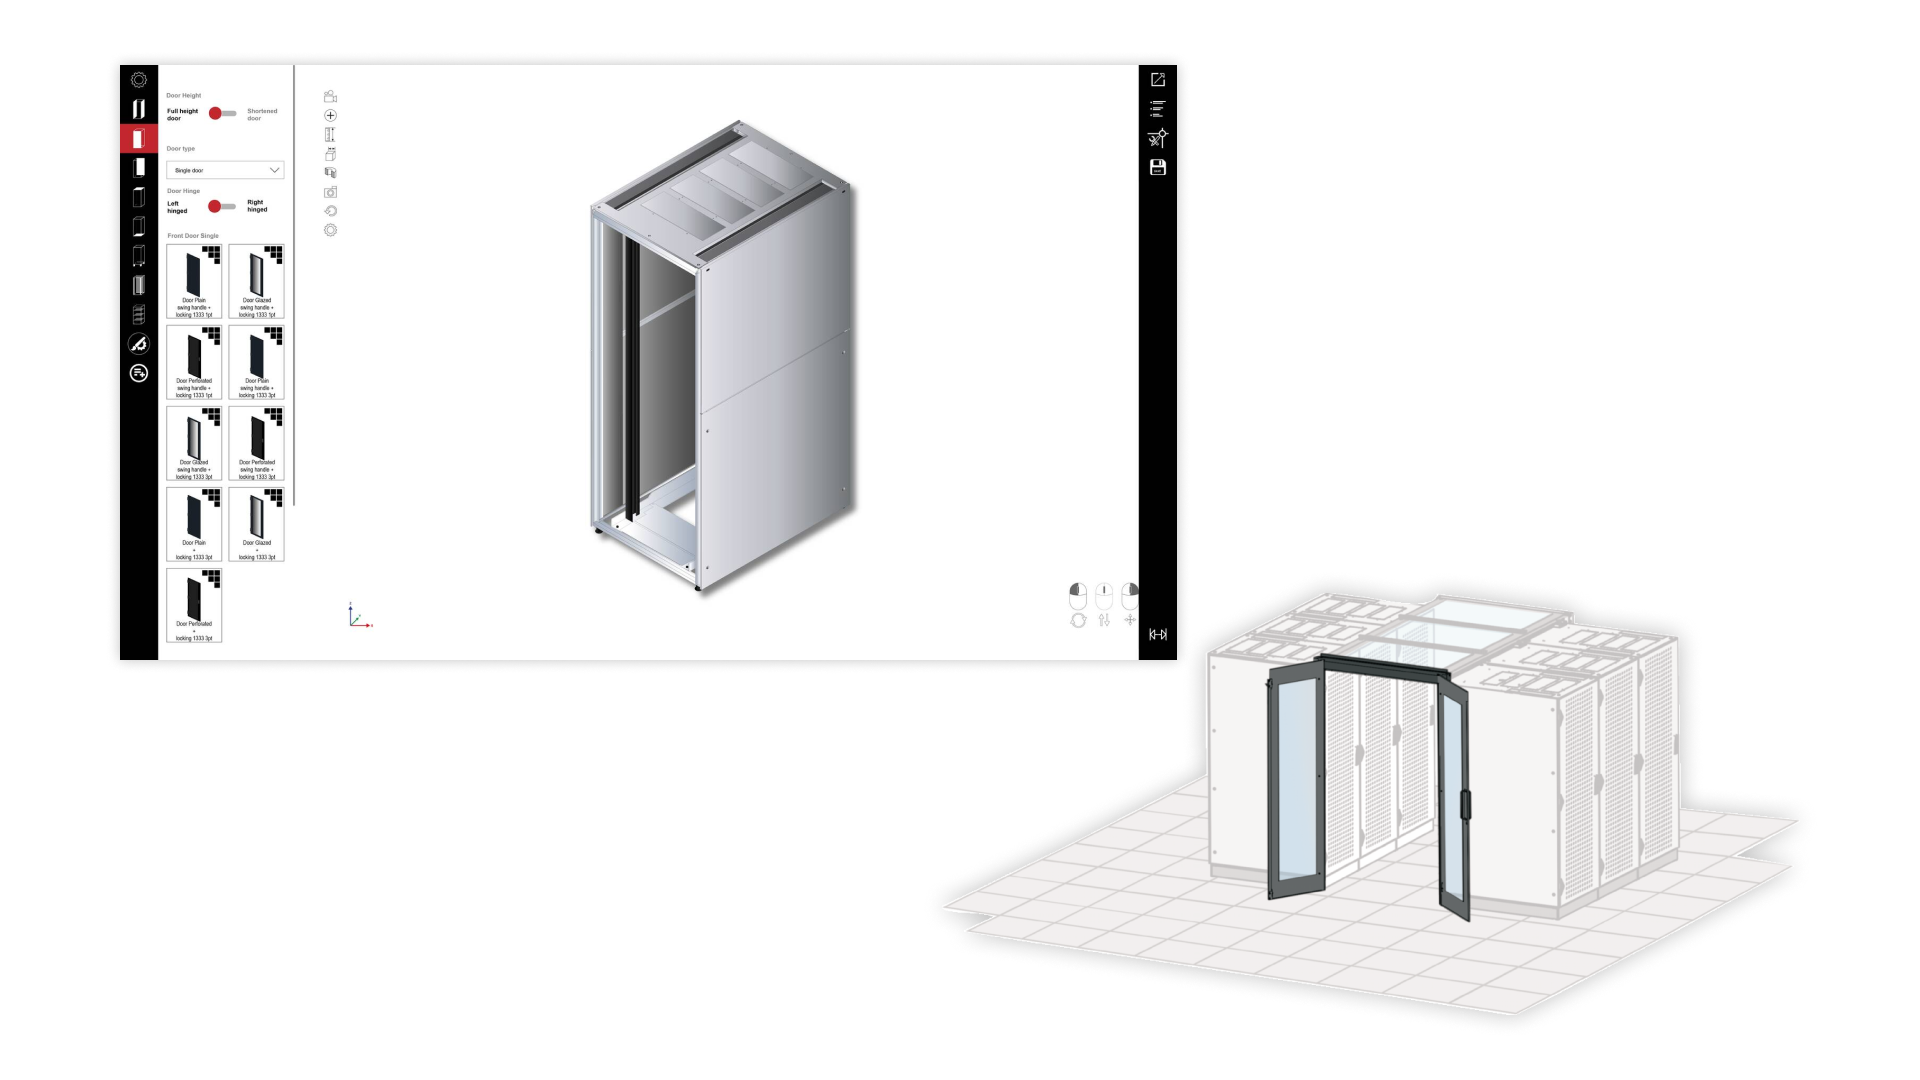 Development of a 2D door configurator for home or office